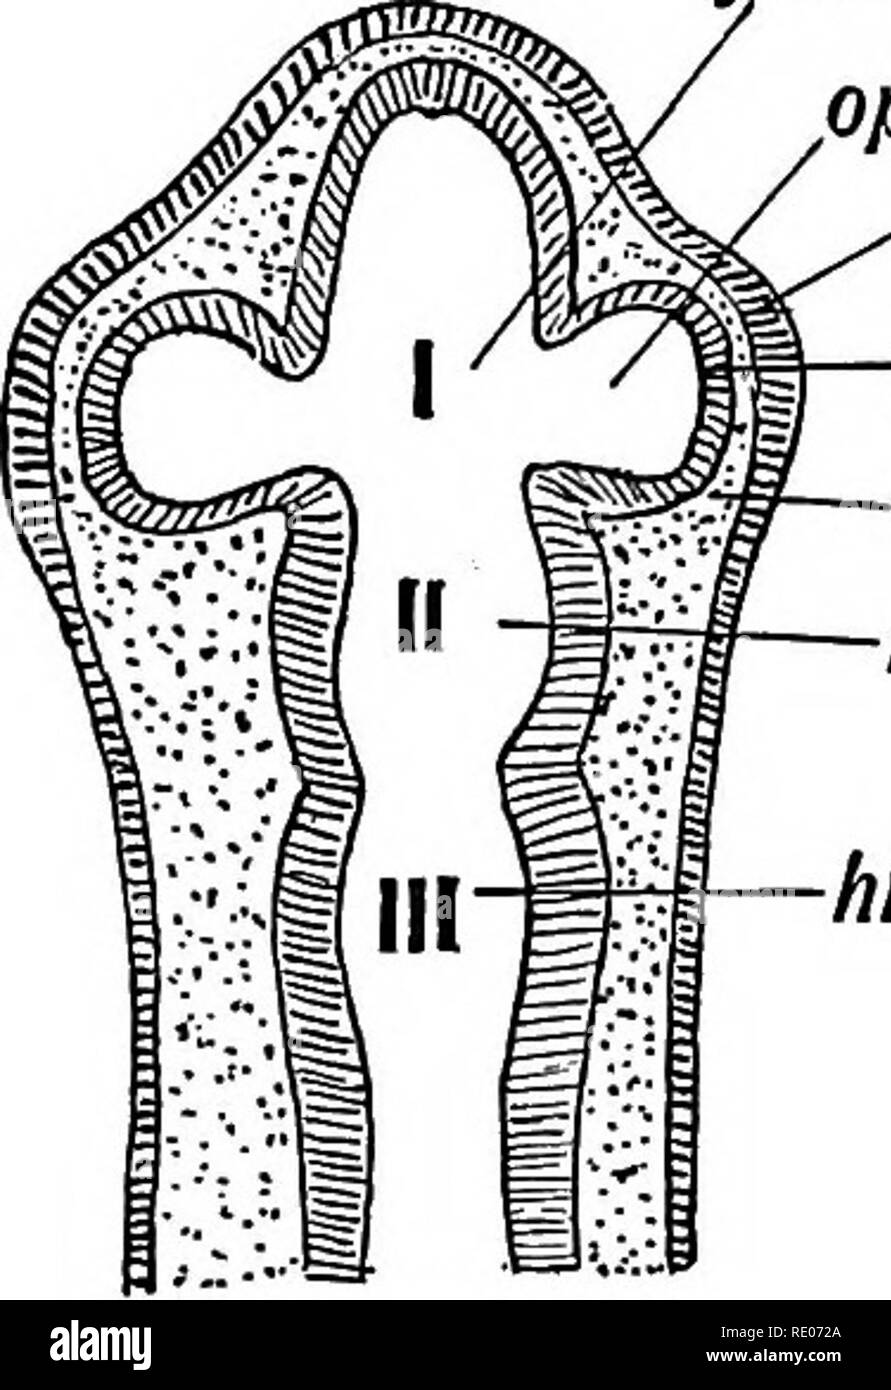 . Human embryology and morphology. Embryology, Human; Morphology. CHAPTEE XIV. DEVELOPMENT OF THE STRUCTURES CONCERNED IN THE SENSE OF SIGHT. The structures concerned in the sense of sight are: (1) The Eyeball and the Optic Nerve. (2) The Eyelids and Lachrymal Apparatus. (3) The Orbit, the Muscles, Nerves, and Vessels contained it. (4) The Nerve Centres and Tracts. The Eyeball.—The condition of the eye in the third week of etal life is shown diagrammatically in Fig. 141. The three fprebrain optic uesicle epiblast neuroblast mesobfast mid-brain hind-brain Fig. 141.—Diagram of the Elements which Stock Photo